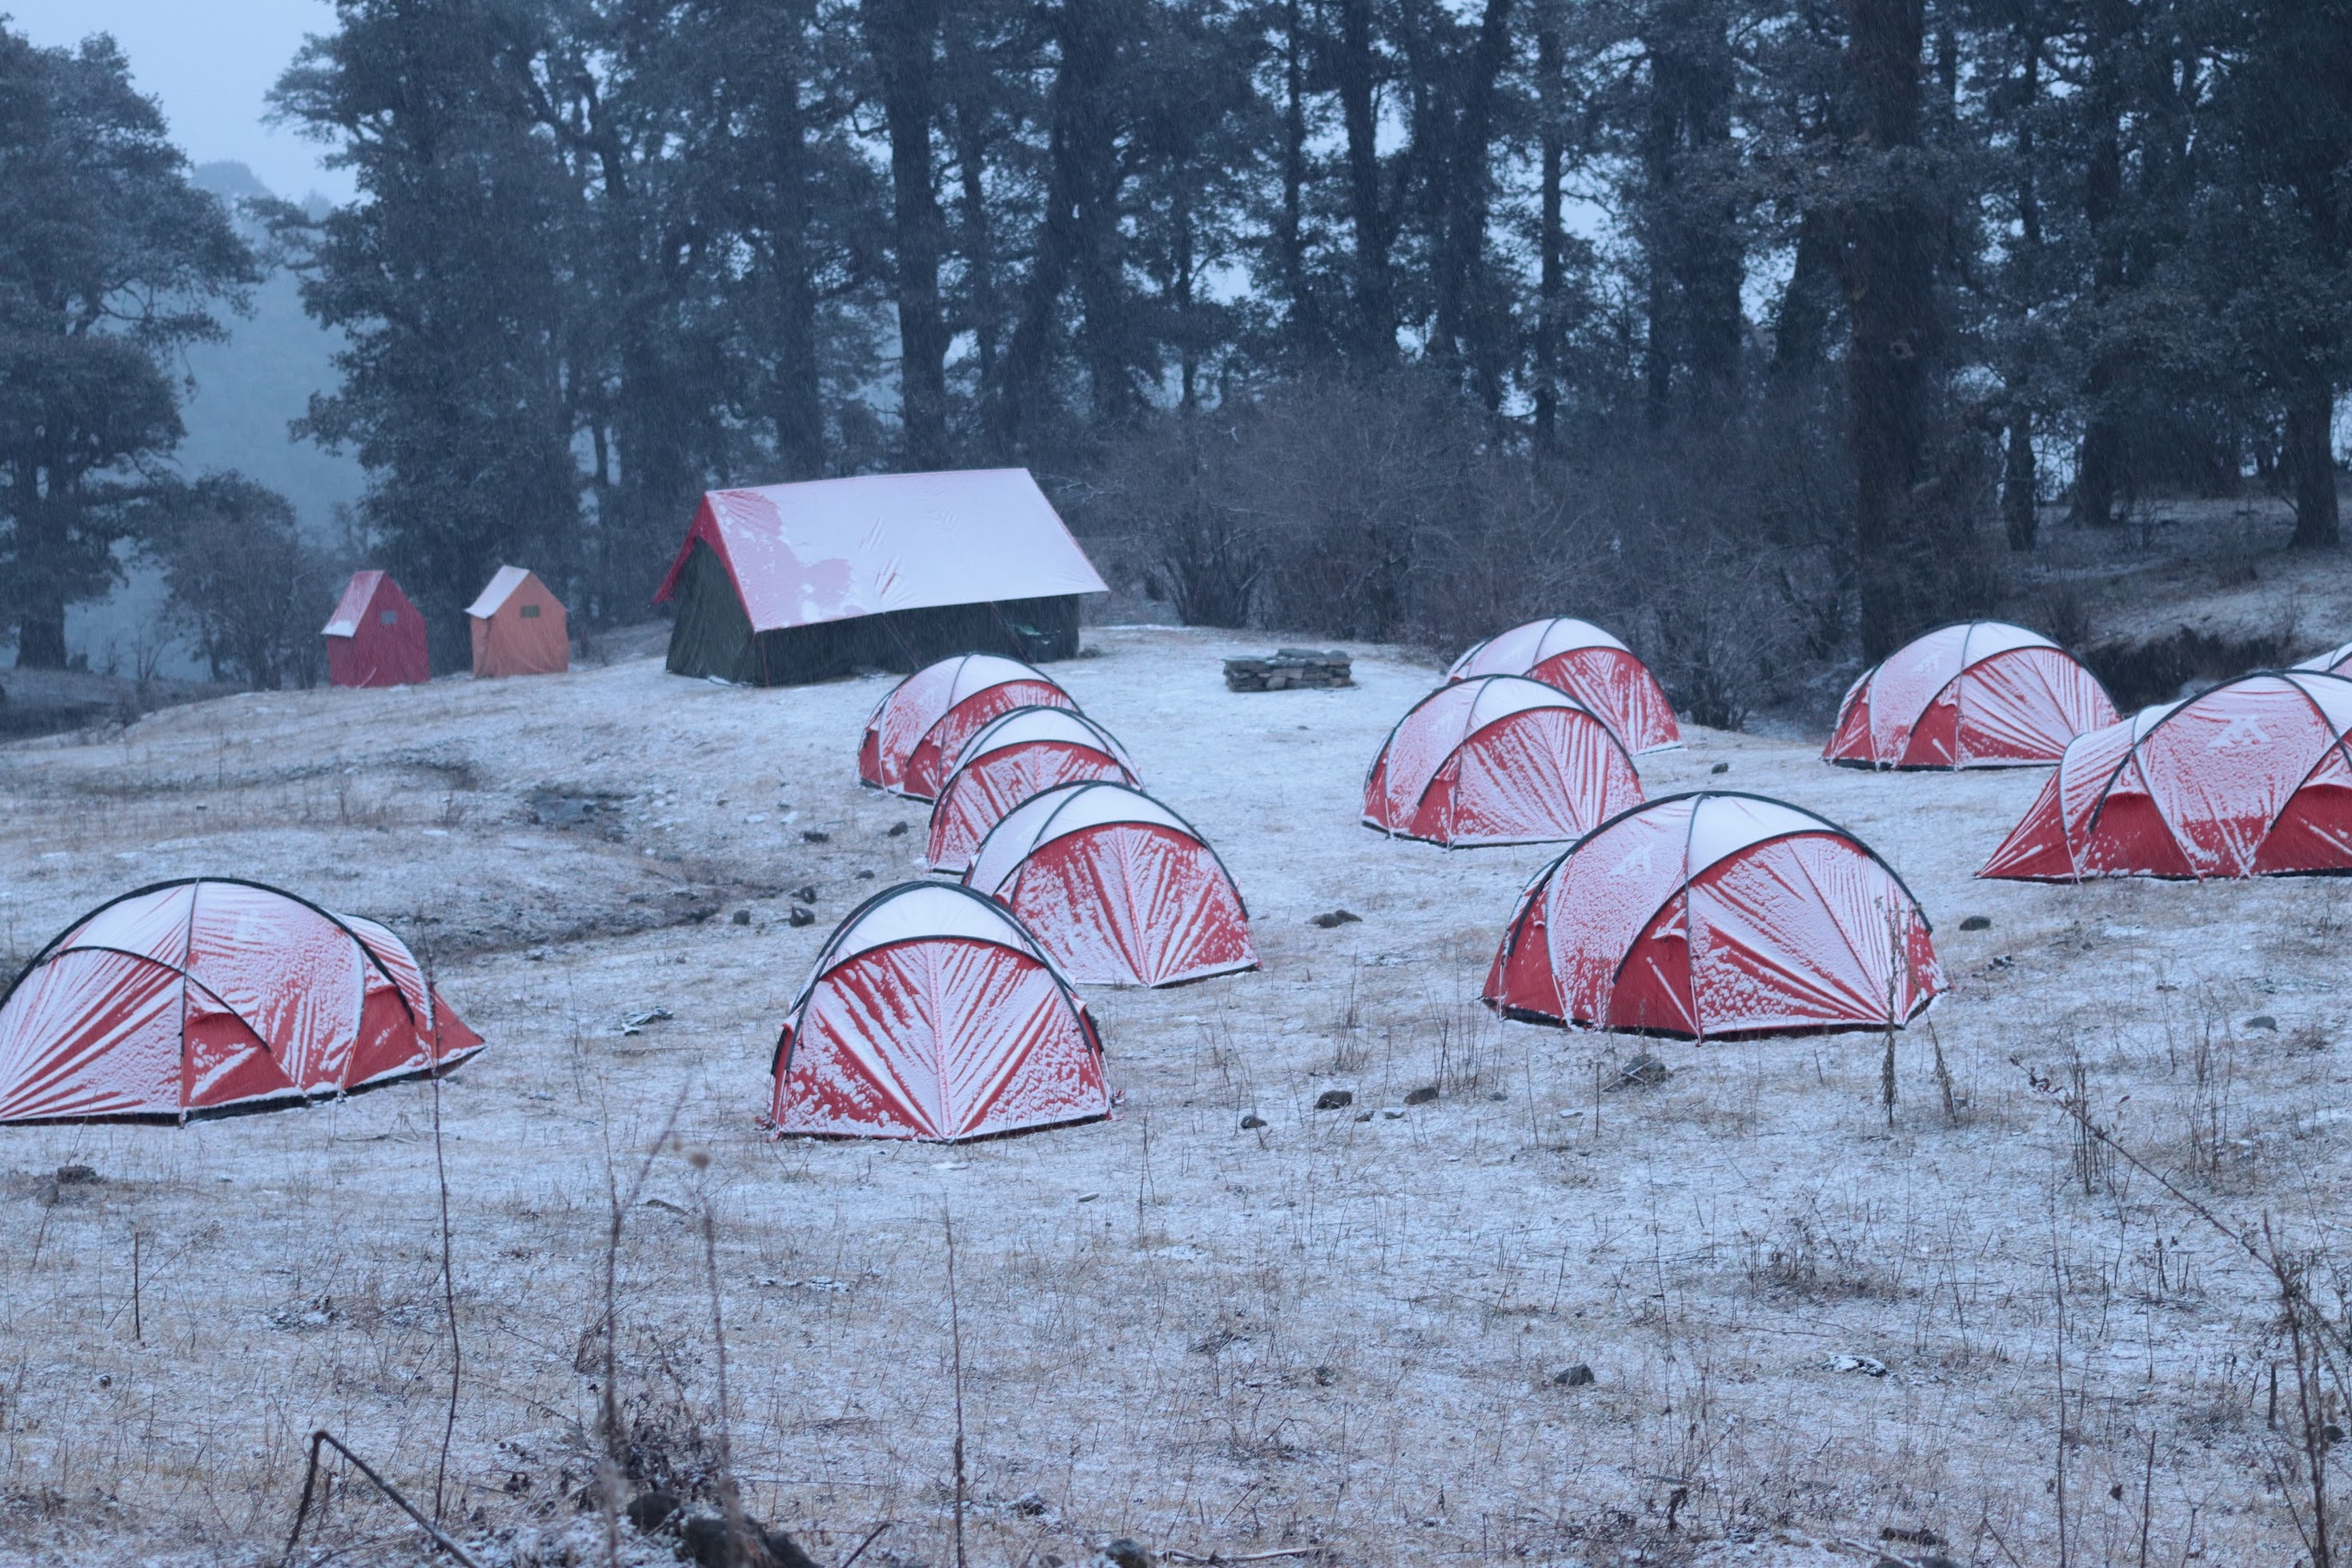 Figure 9: Snow fell in the evening, and we shivered inside the tents